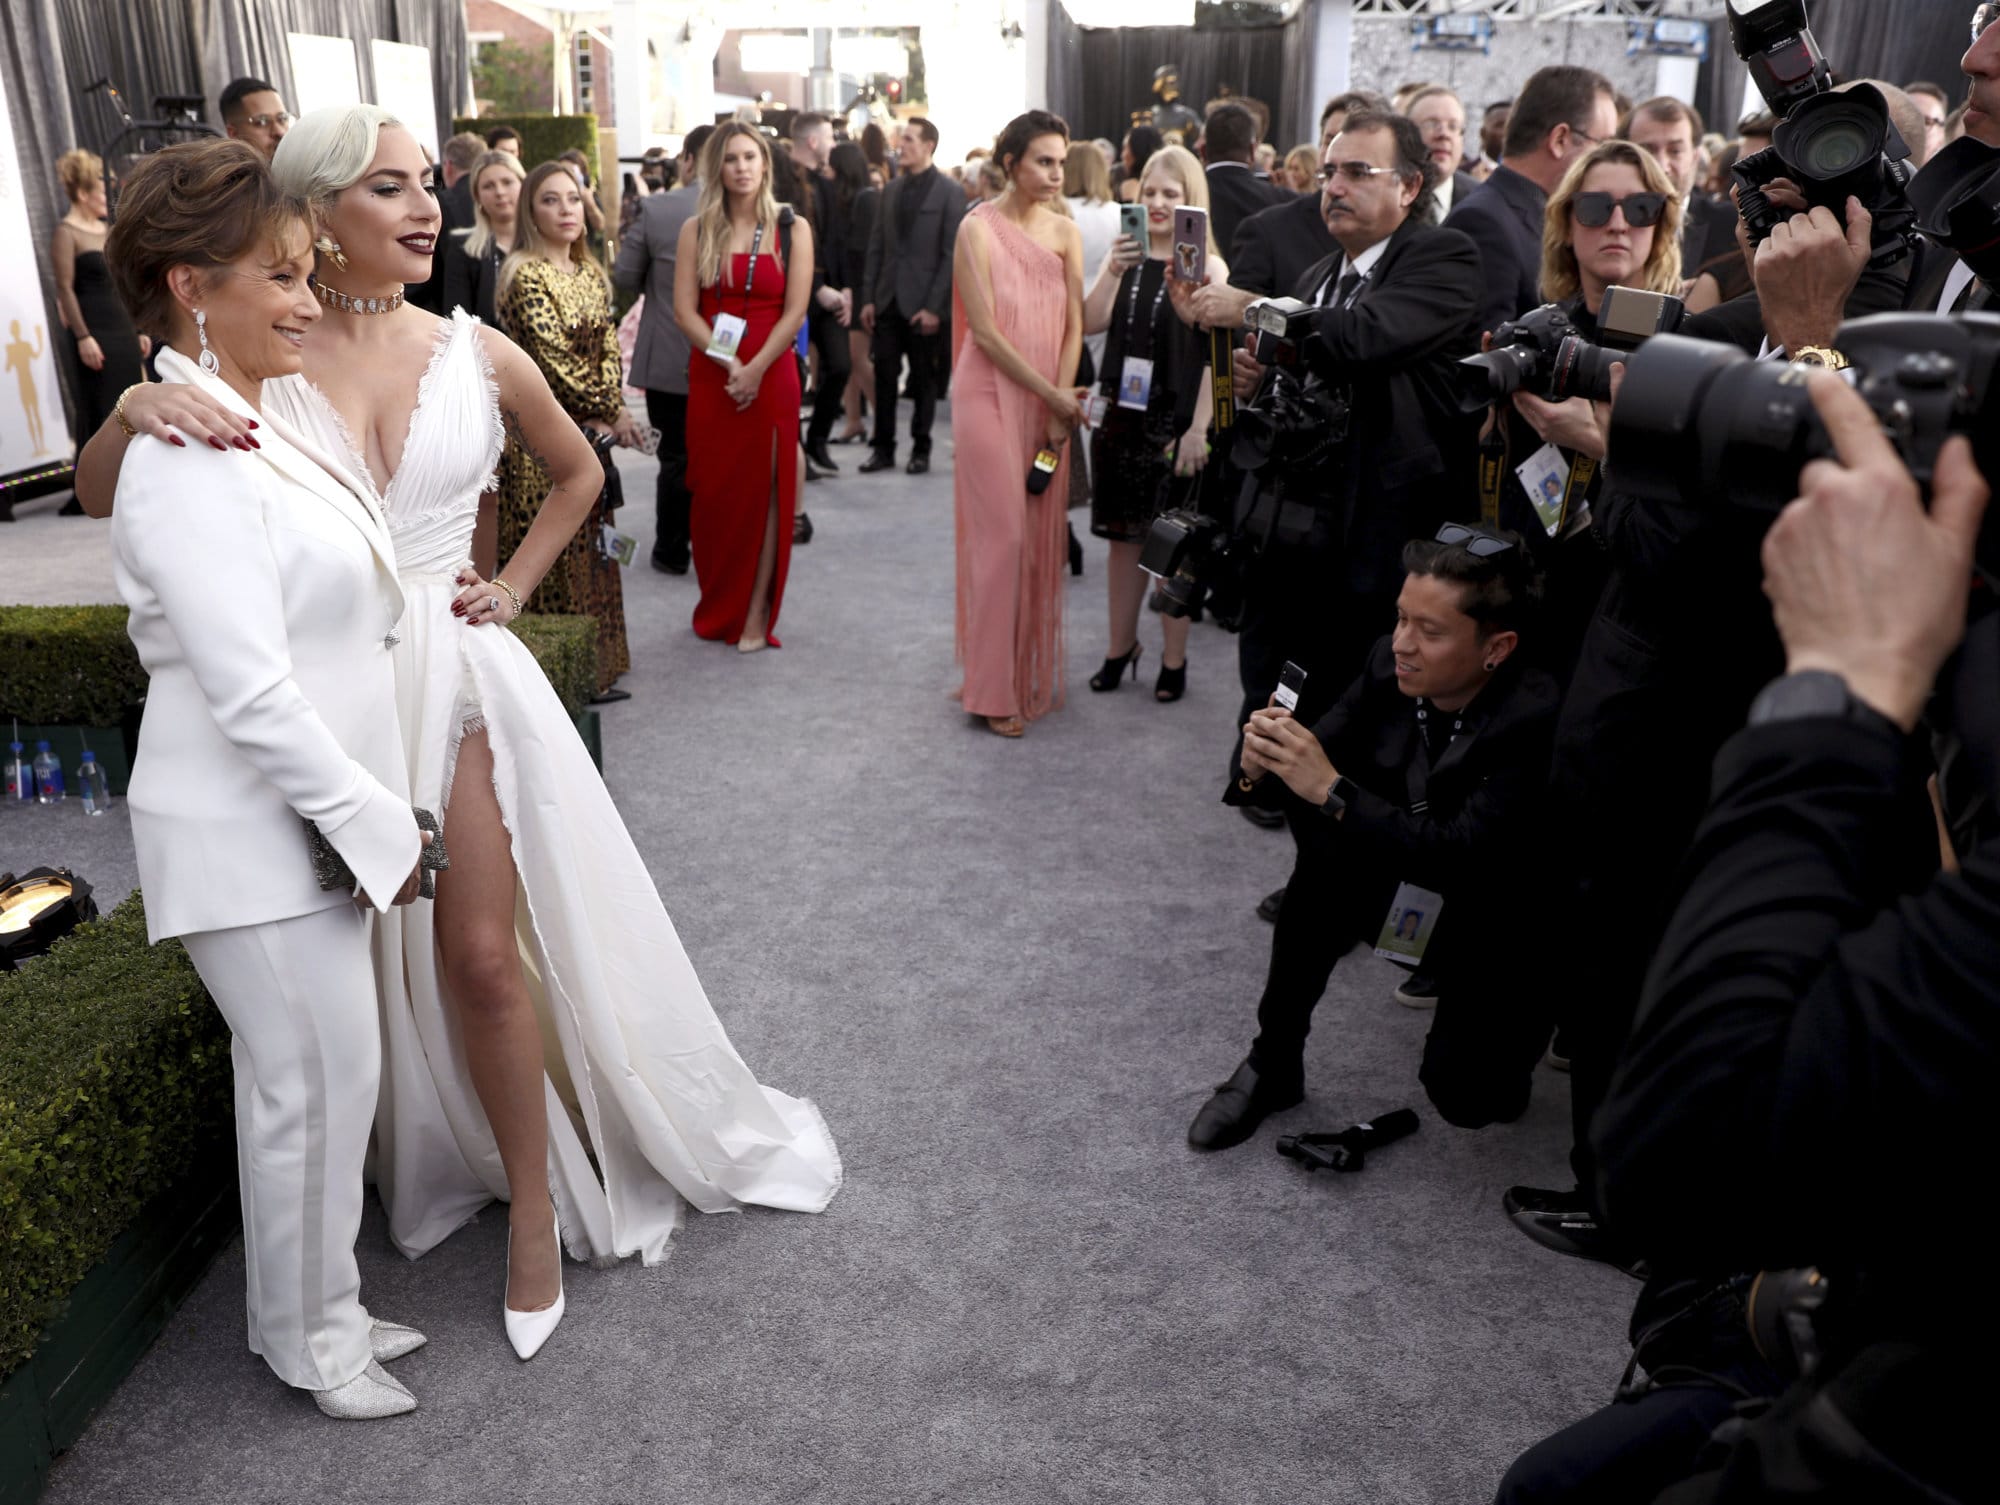 Gabrielle Carteris, executive vice president of SAG-AFTRA, left, and Lady Gaga pose at the 25th annual Screen Actors Guild Awards at the Shrine Auditorium &amp; Expo Hall on Sunday, Jan. 27, 2019, in Los Angeles. (Photo by Matt Sayles/Invision/AP)